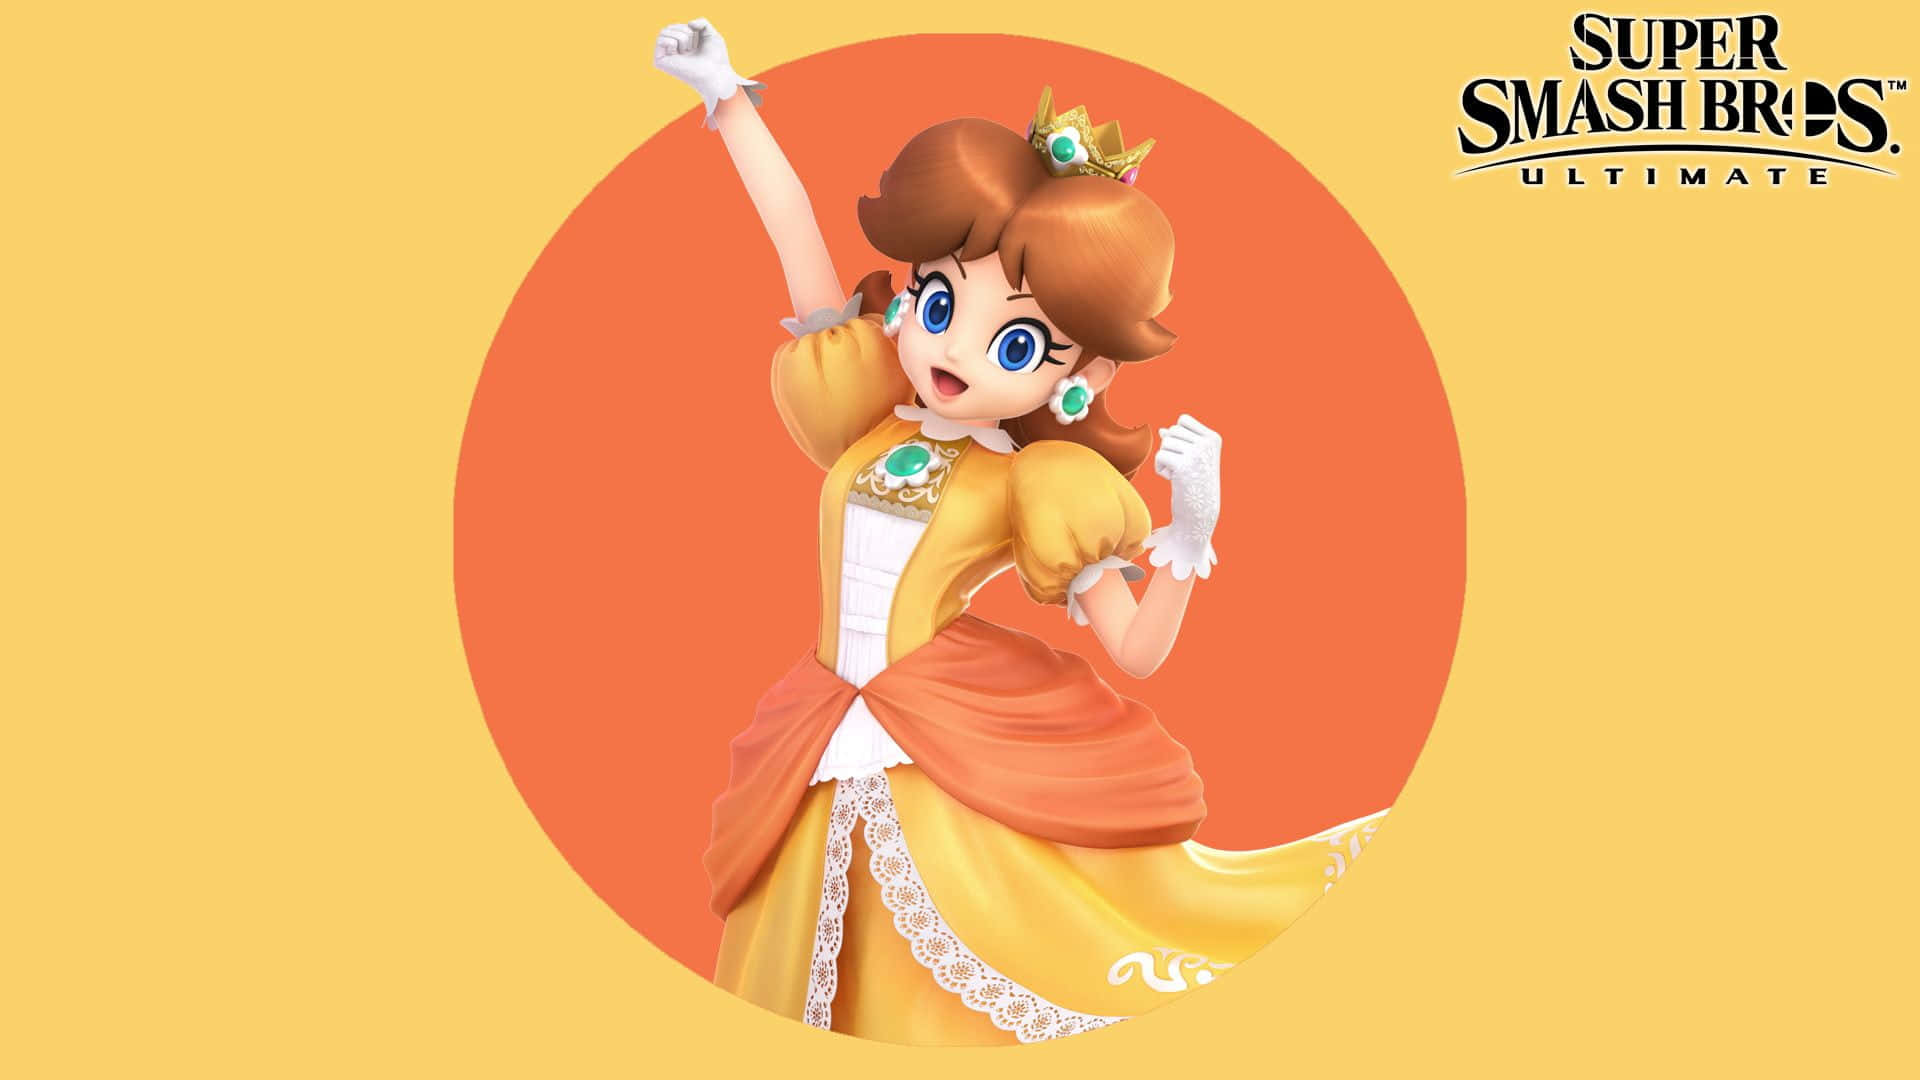 Princess Daisy Smiling Charmingly in Vibrant Outfit Wallpaper